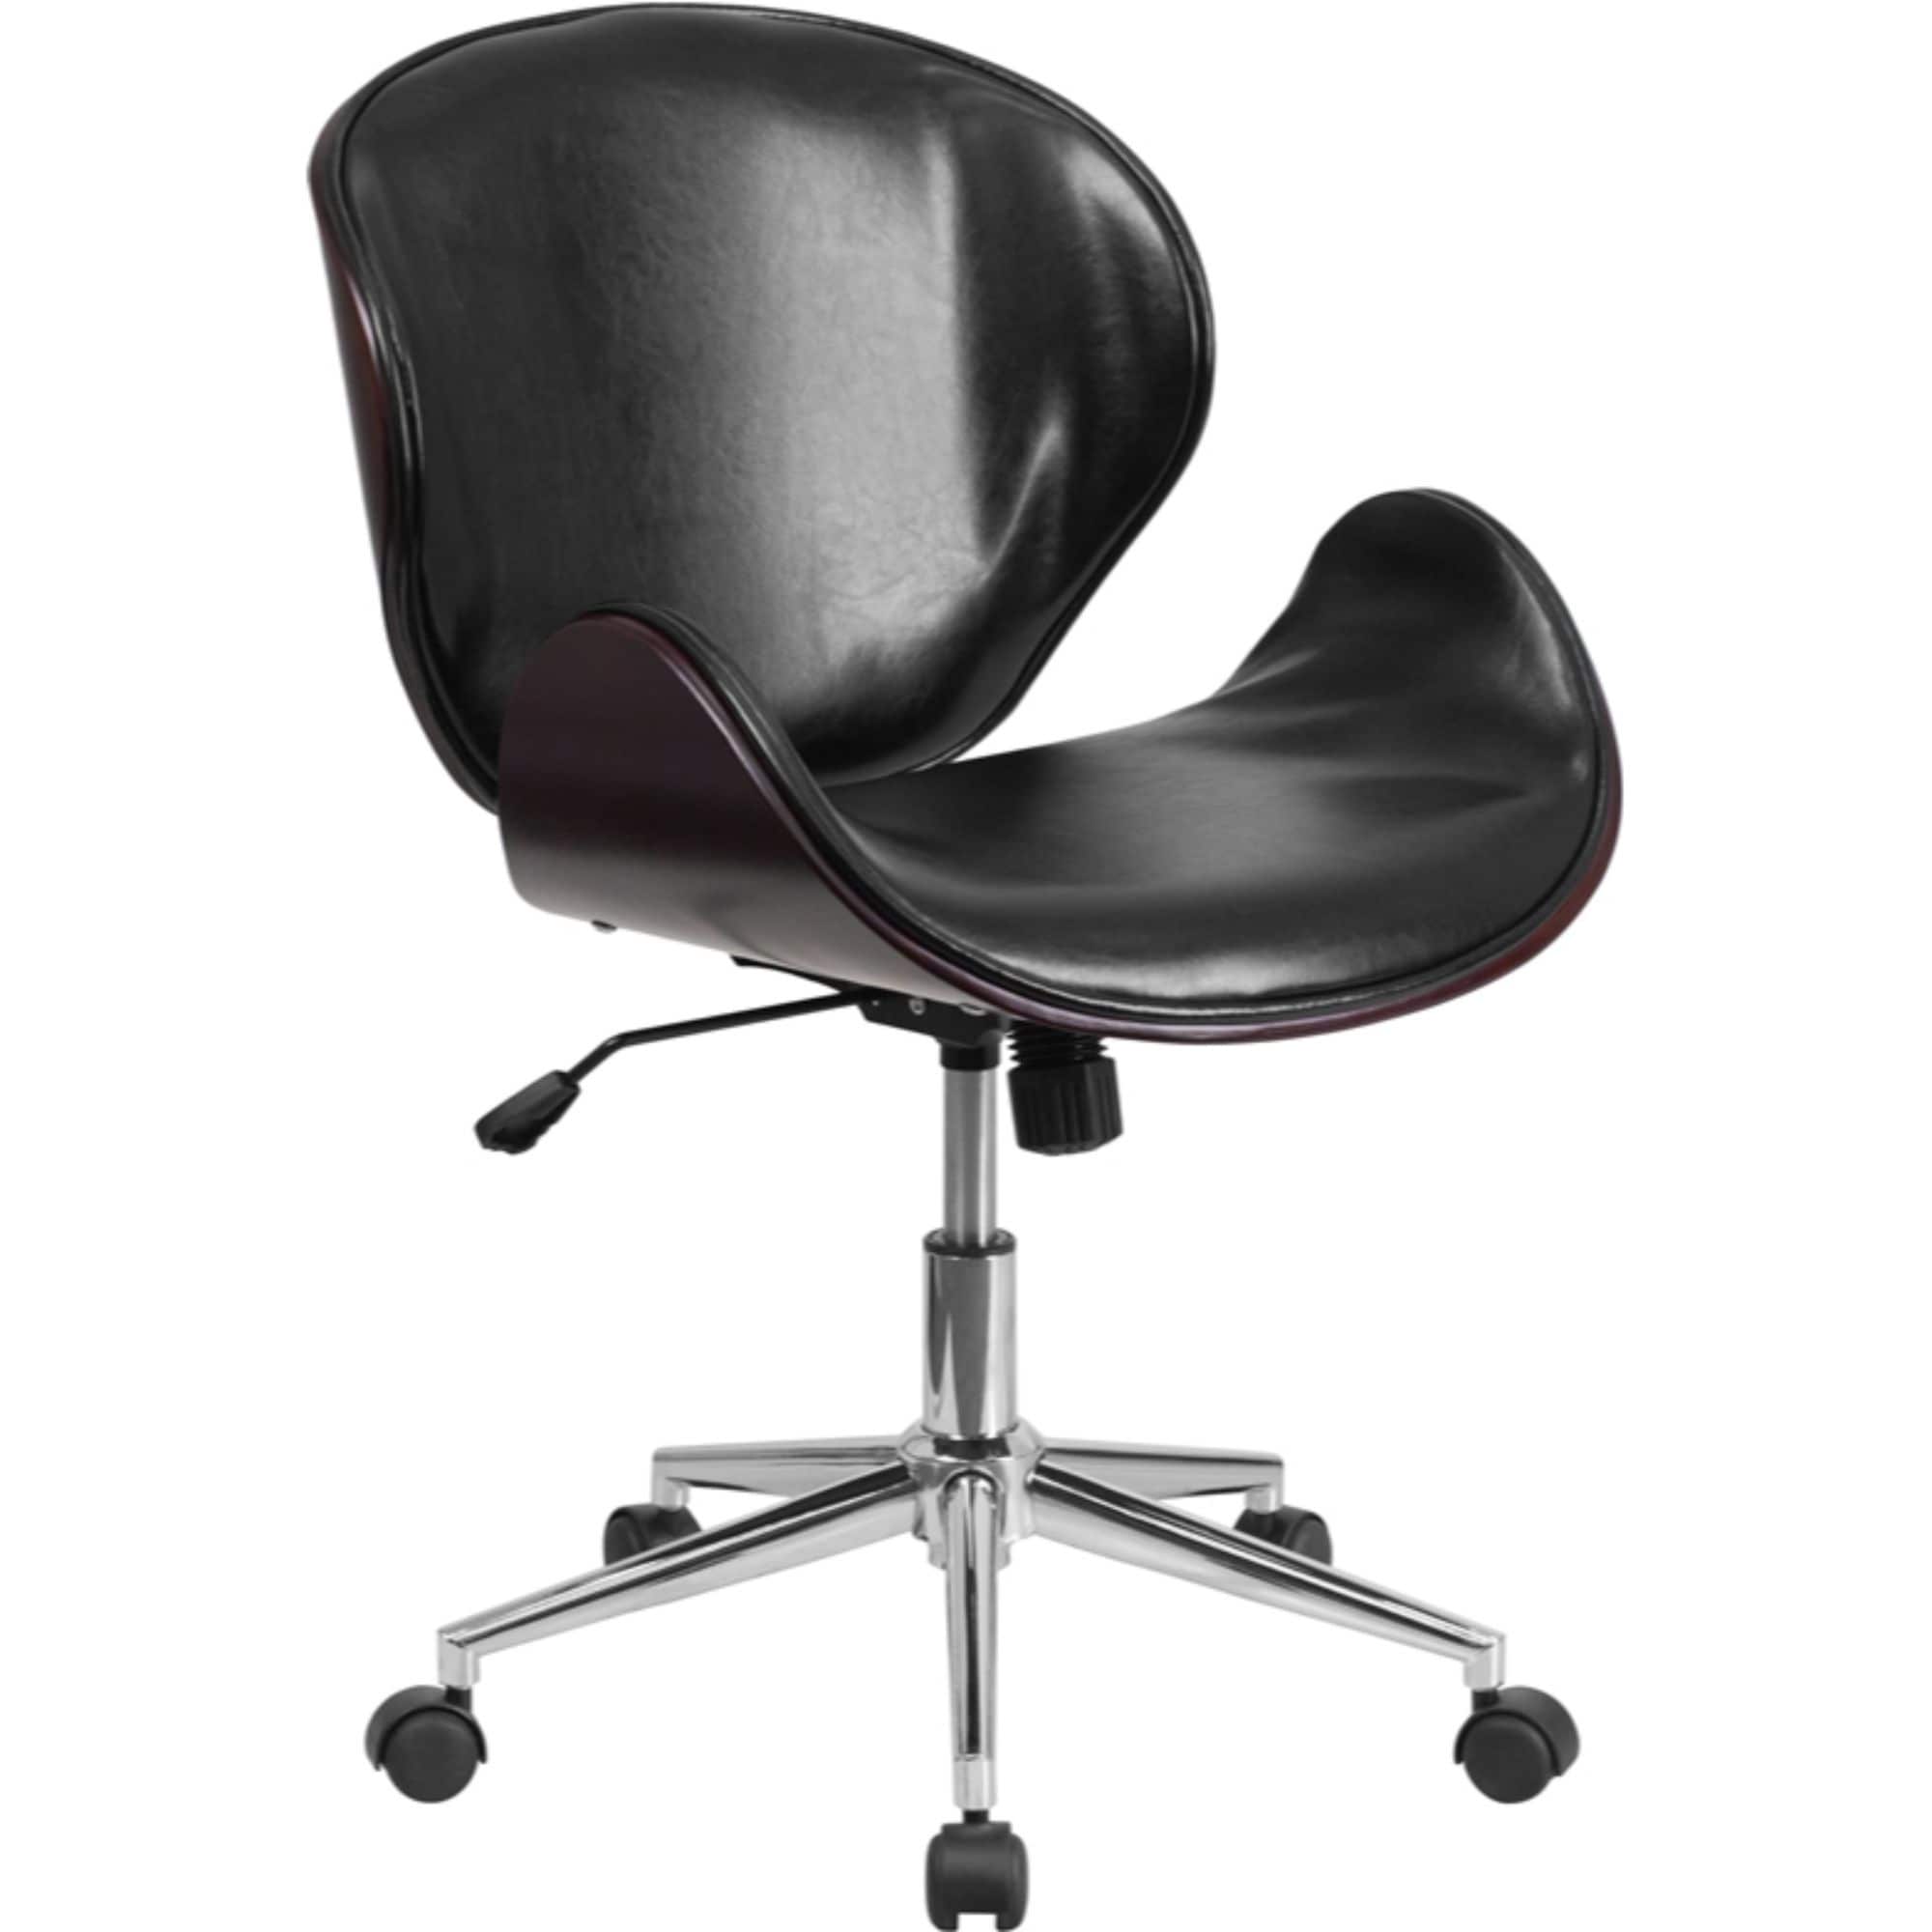 Offex Mid-Back Mahogany Wood Swivel Conference Chair in Black Leather - 21.5"W x 26"D x 32" - 35.25"H